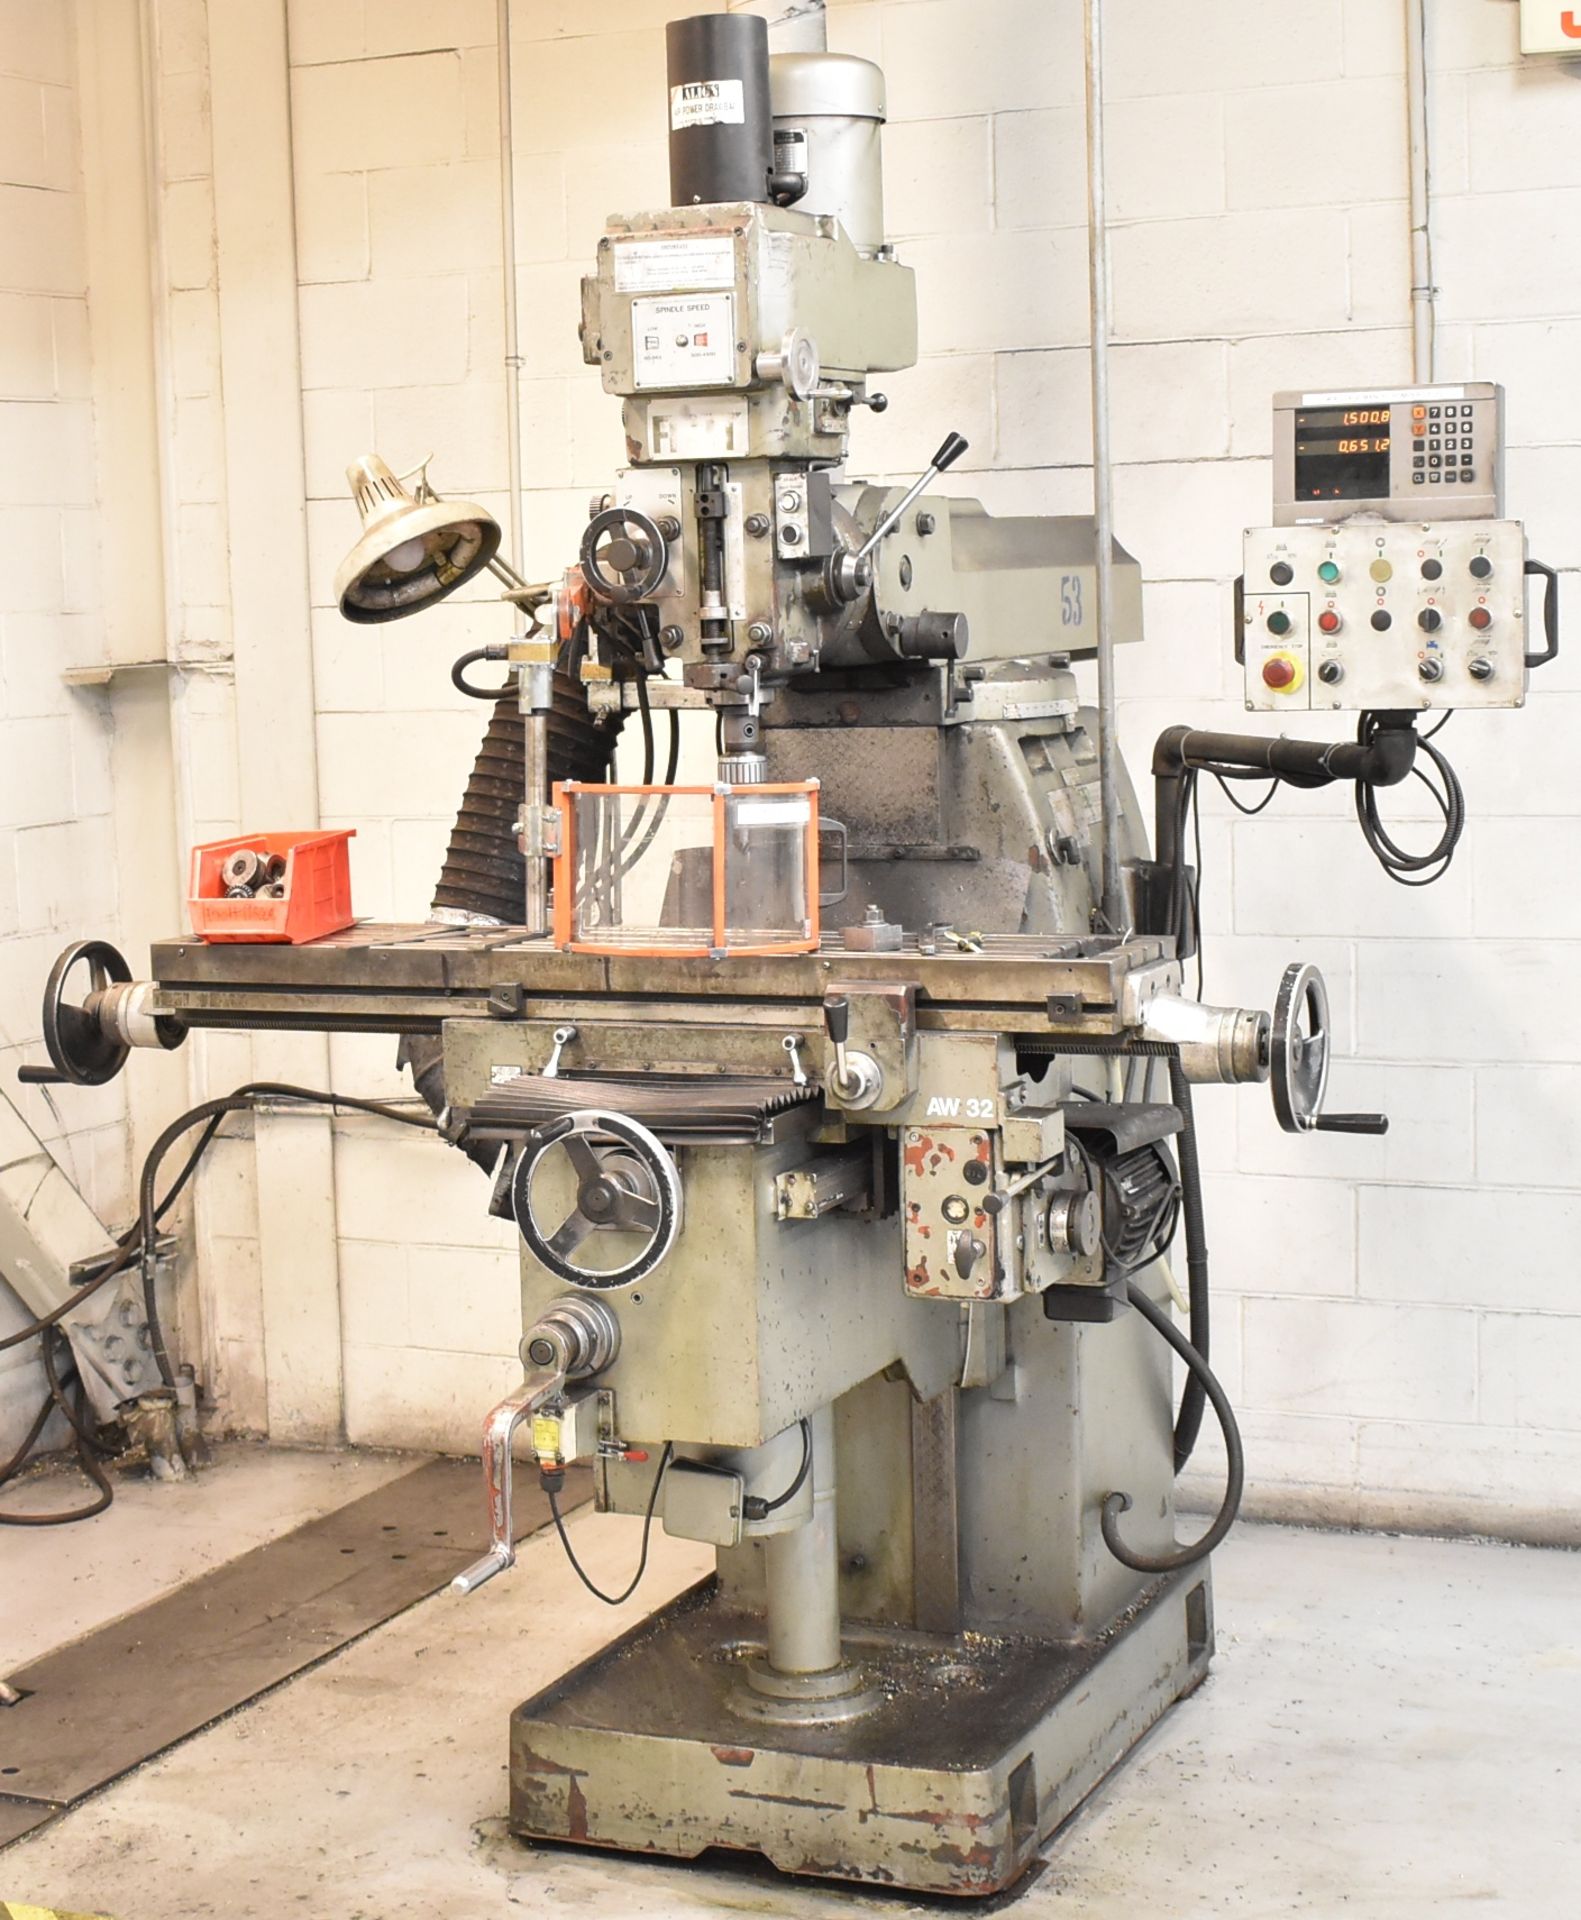 FIRST LC20 VERTICAL TURRET MILLING MACHINE WITH 50"X10" TABLE, SPEEDS TO 4500 RPM, HEIDENHAIN 2-AXIS - Image 2 of 3